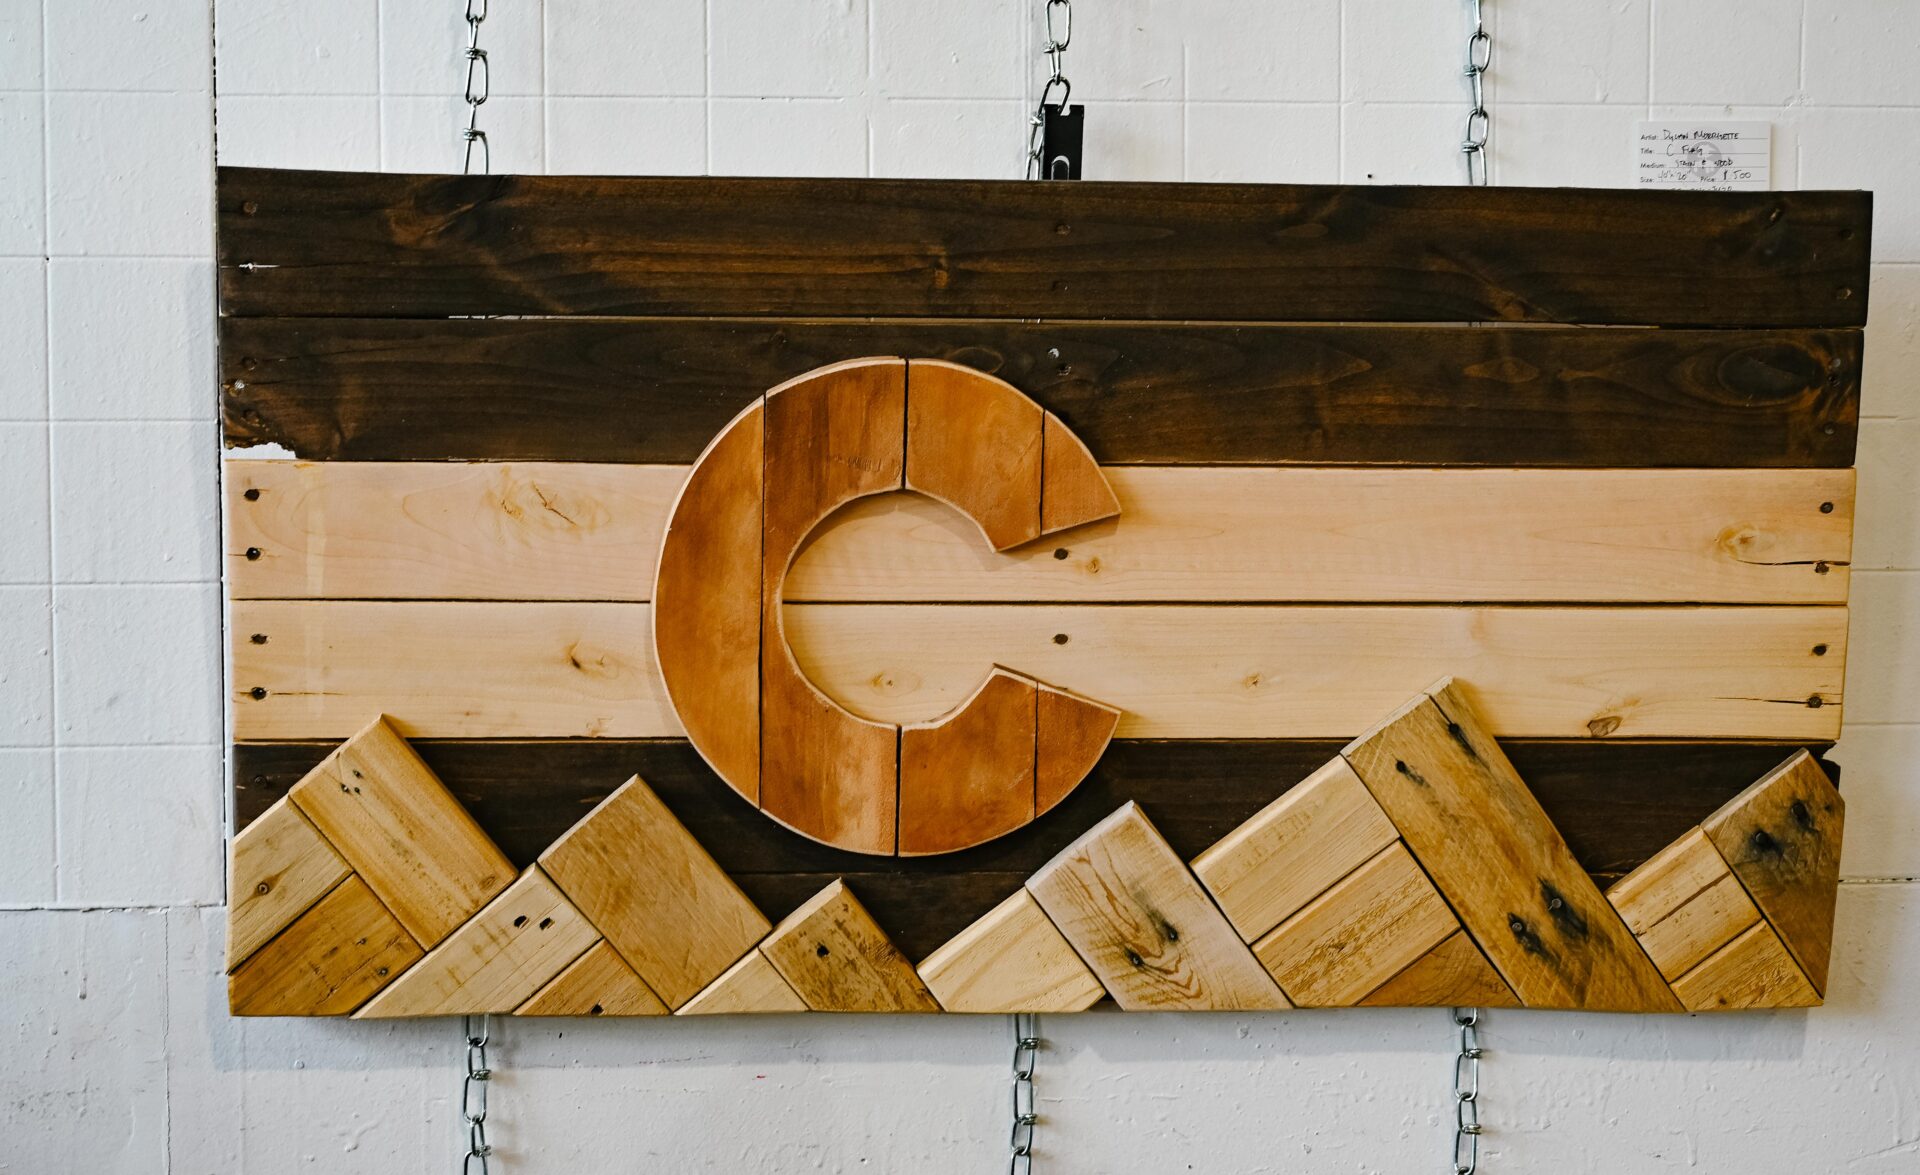 a wooden mural art piece depicting a large letter C for colorado with wooden mountains below